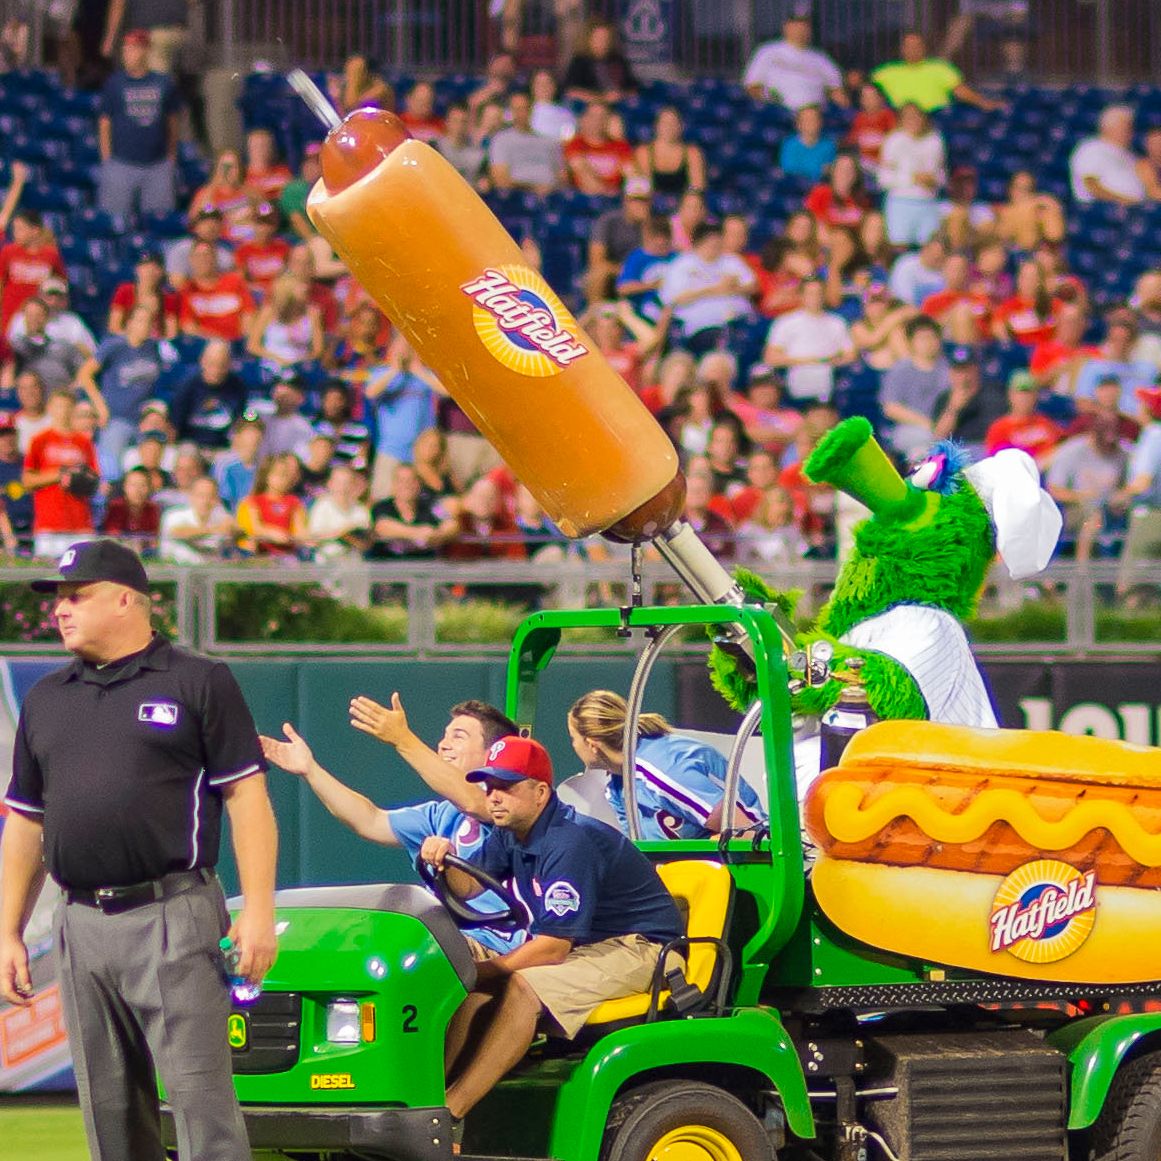 The Hot-Dog Cannon Is Better Than Any Baseball Game